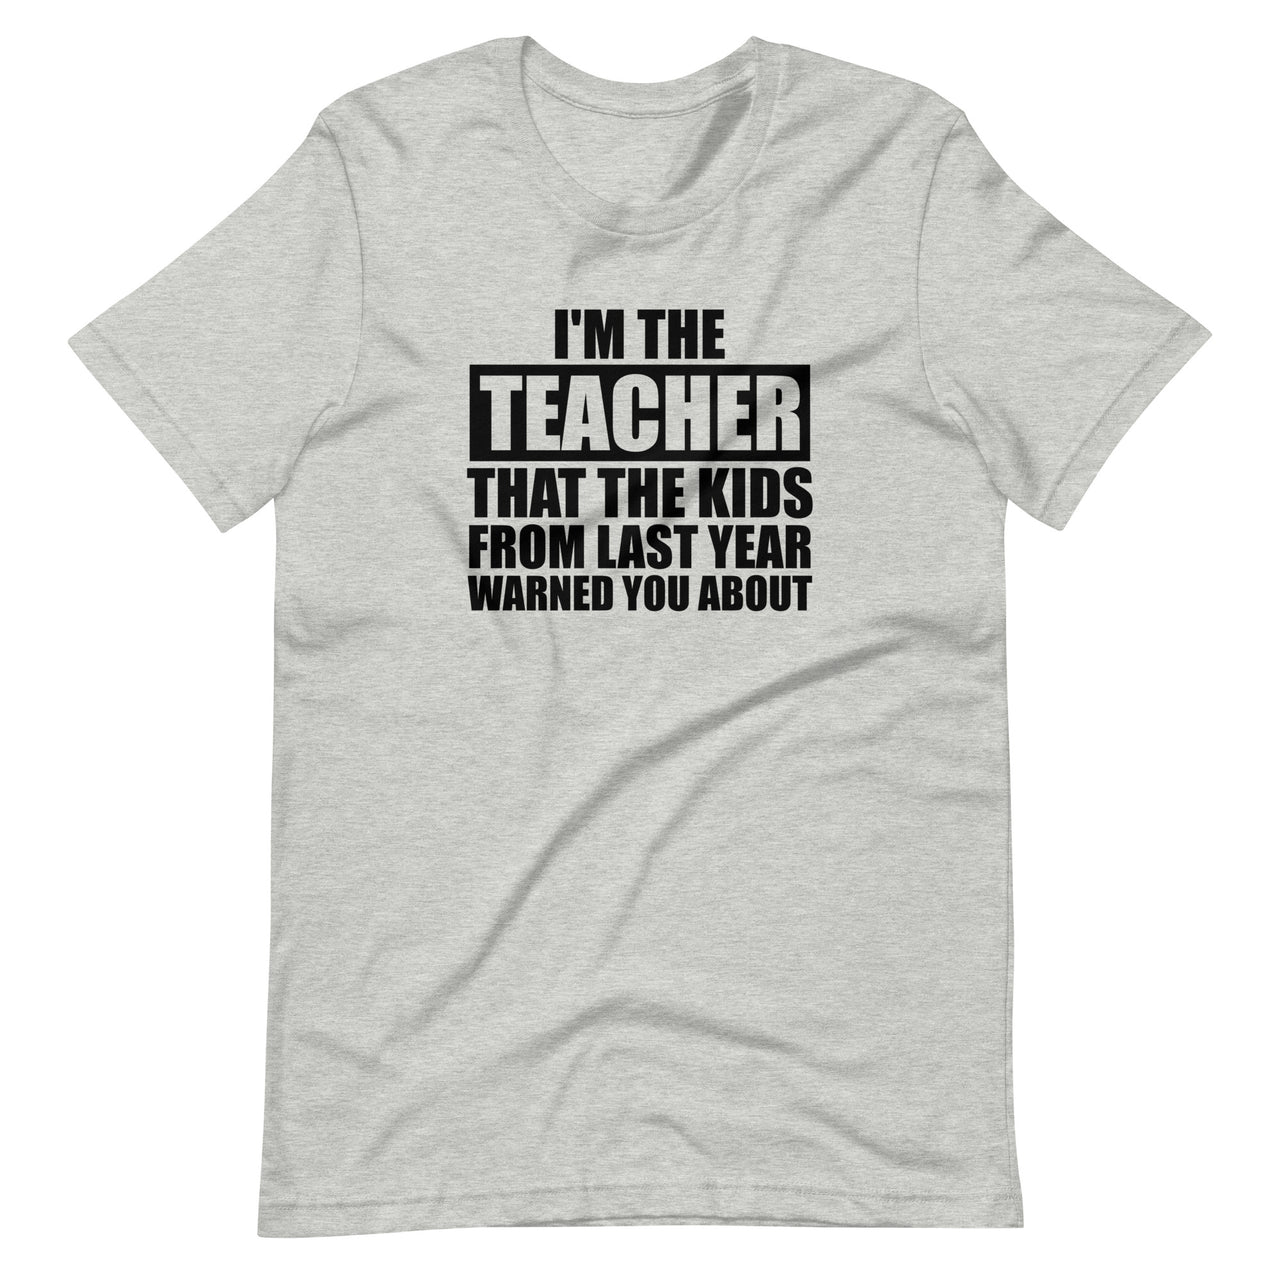 I'm The Teacher You Were Warned About T-Shirt